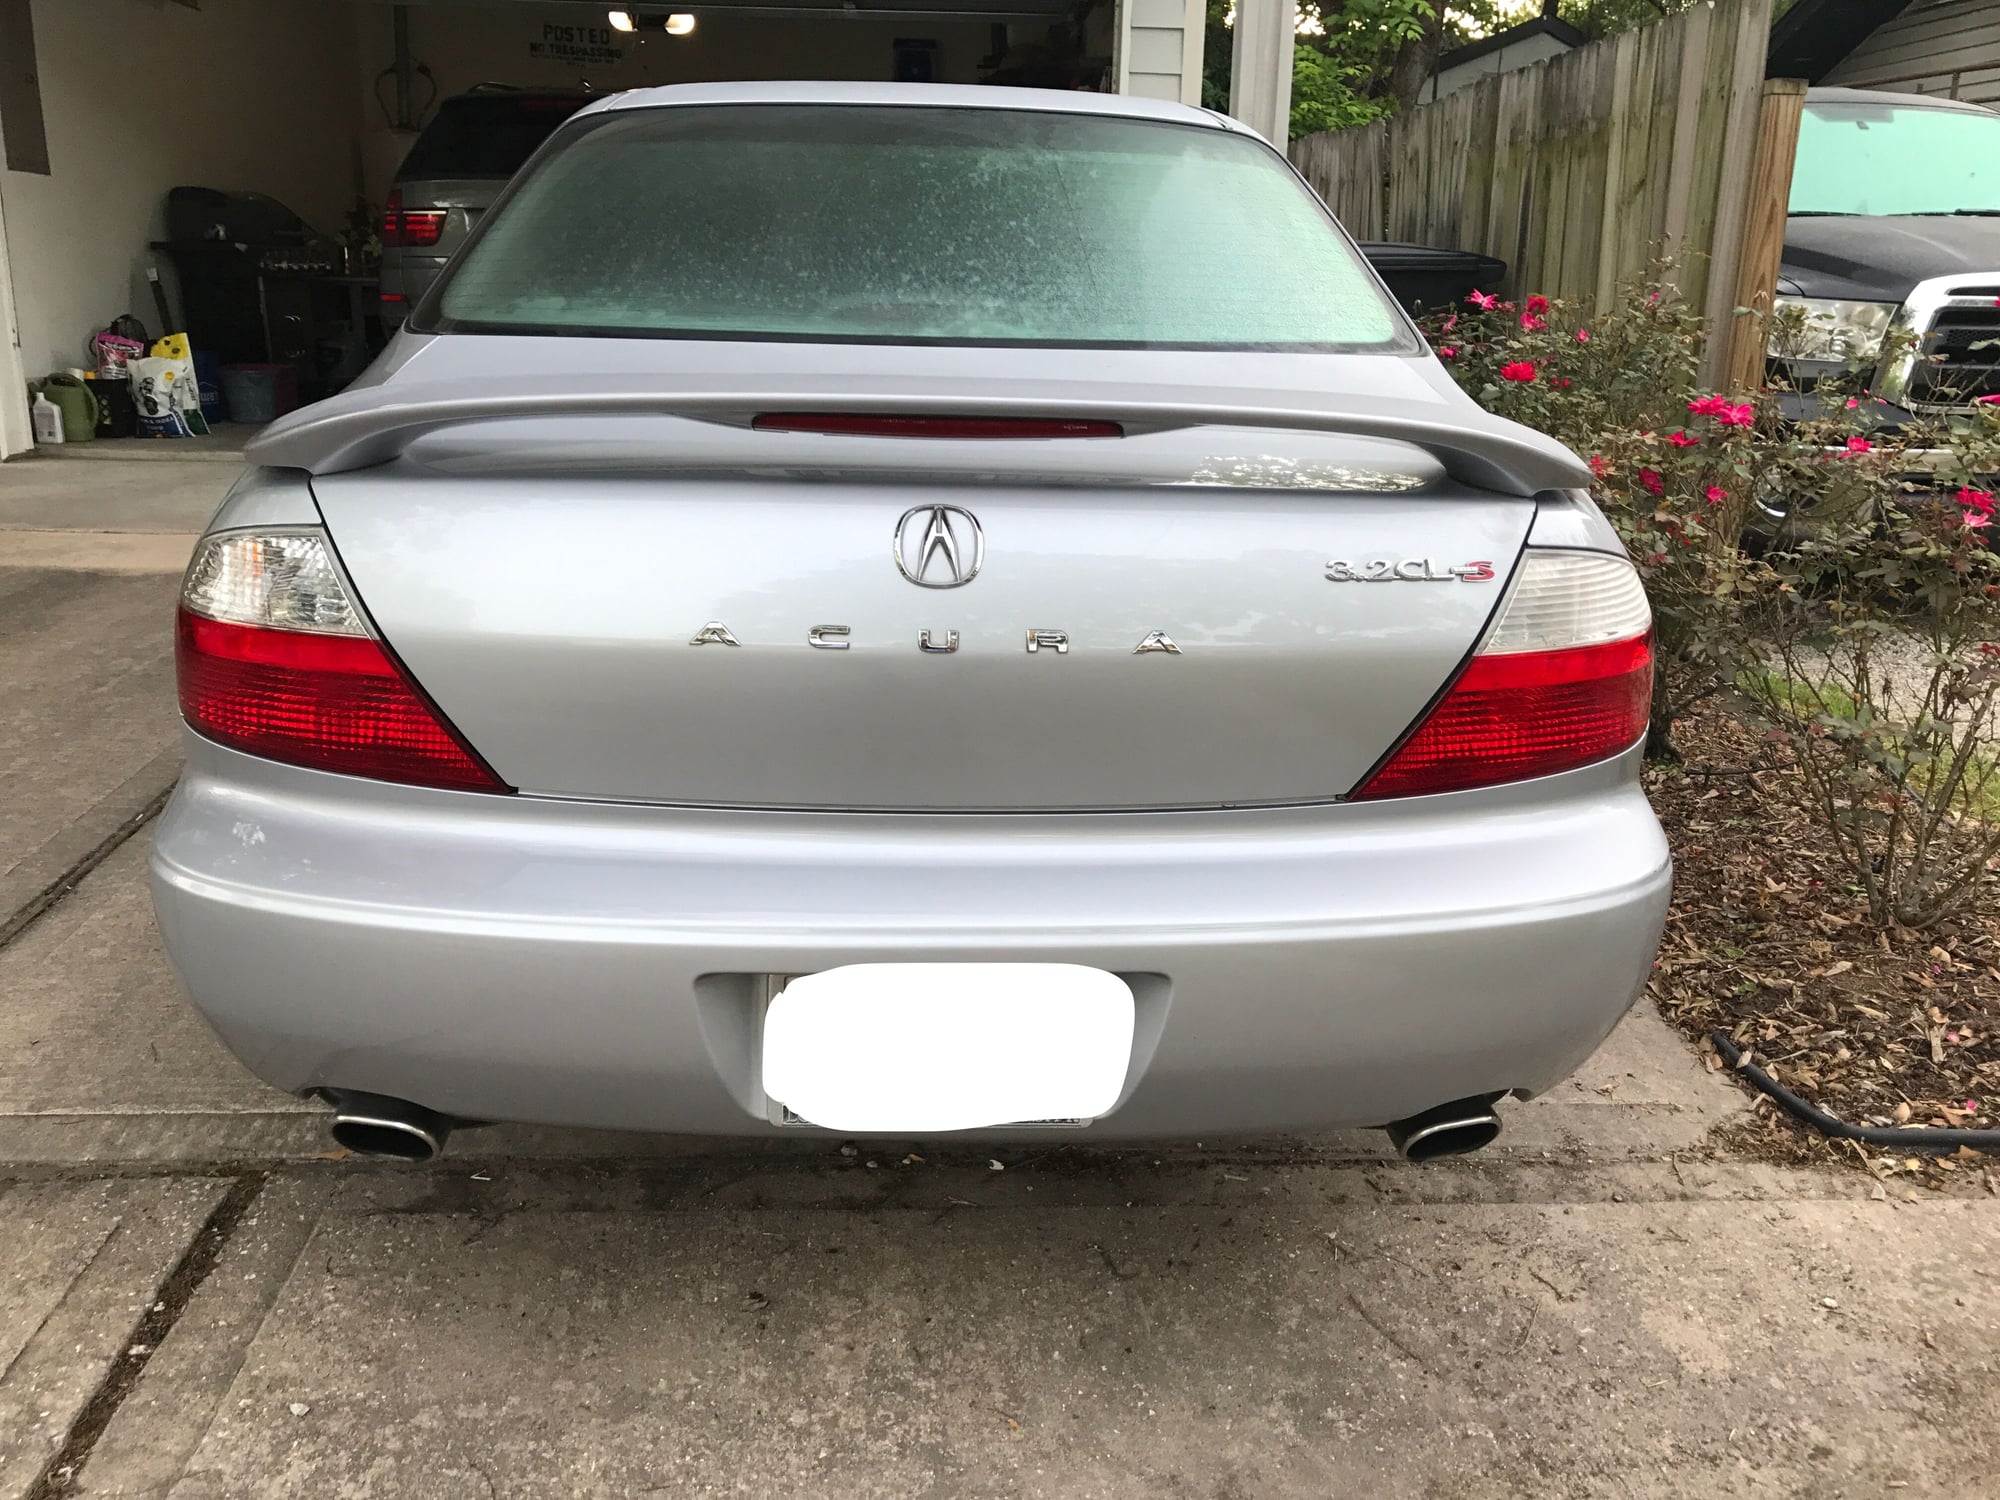 2003 Acura CL - SOLD: 2003 Acura CL-S 6MT - Used - VIN 19UYA41693A007992 - 192,000 Miles - 6 cyl - 2WD - Manual - Coupe - Silver - Houston, TX 77002, United States